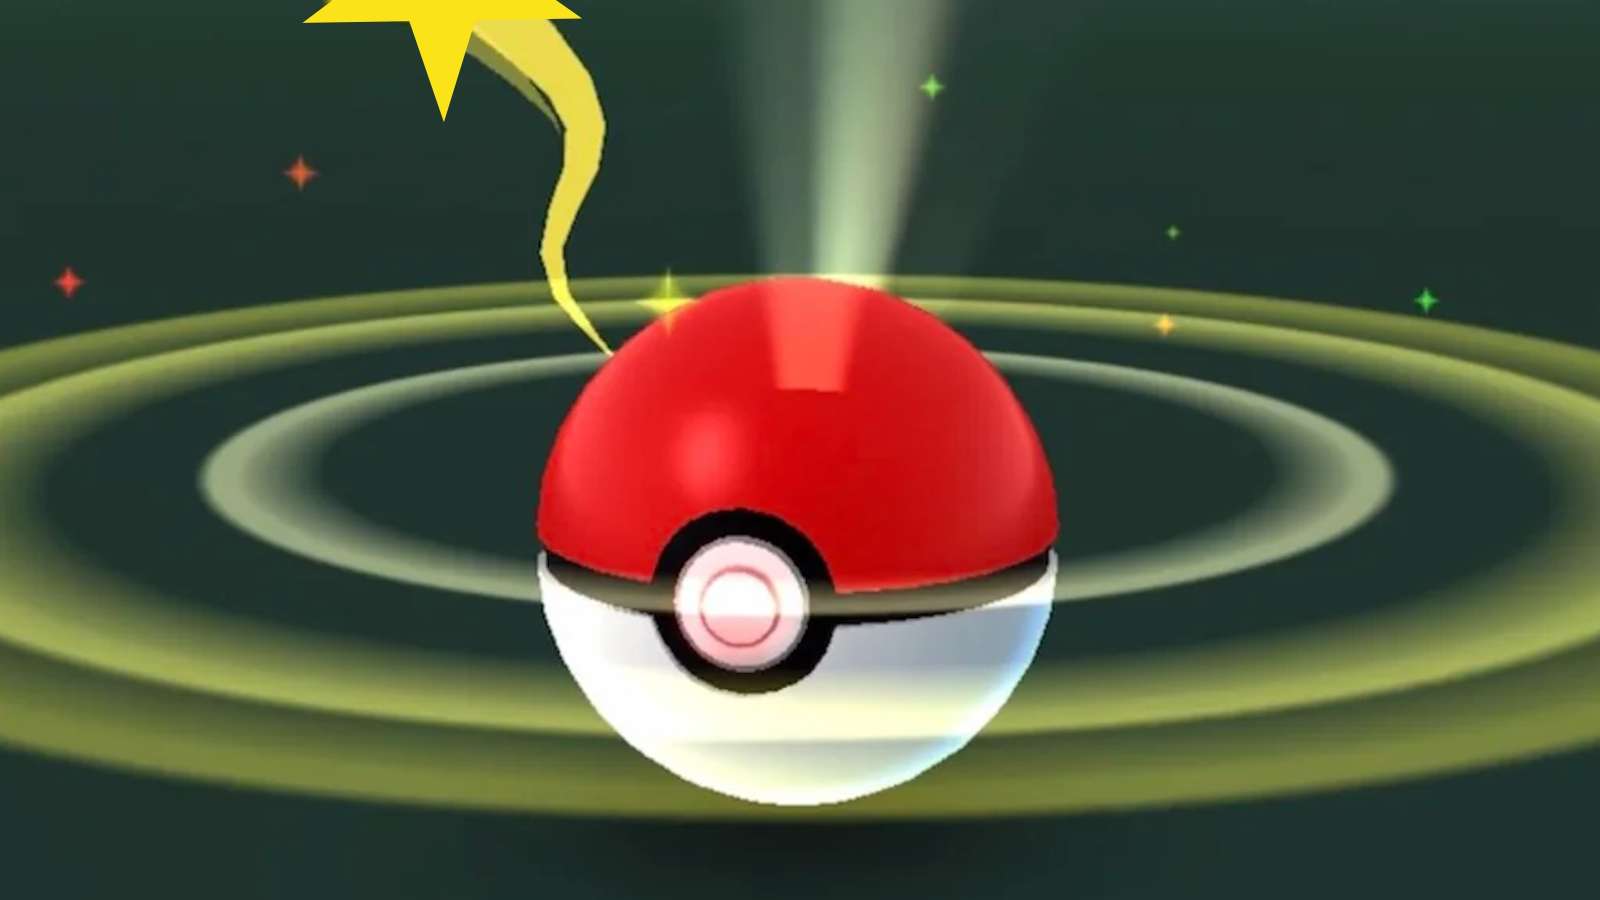 The critical catch animation from Niantic's Pokemon Go.